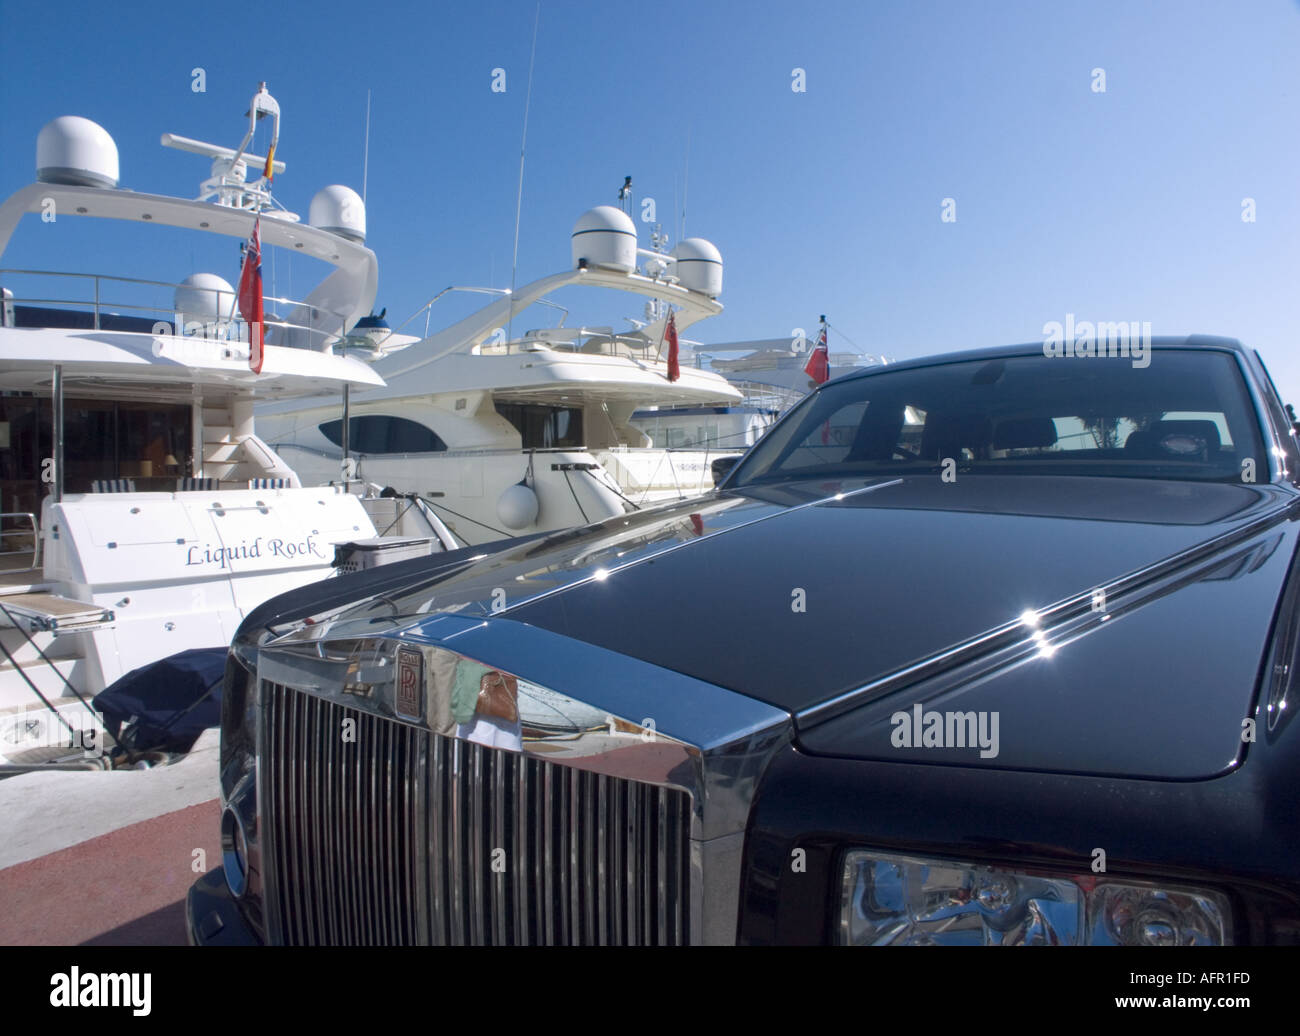 Sports cars parked next to yachts in the Luxury marina of Puerto banus,  Marbella, Spain Stock Photo - Alamy